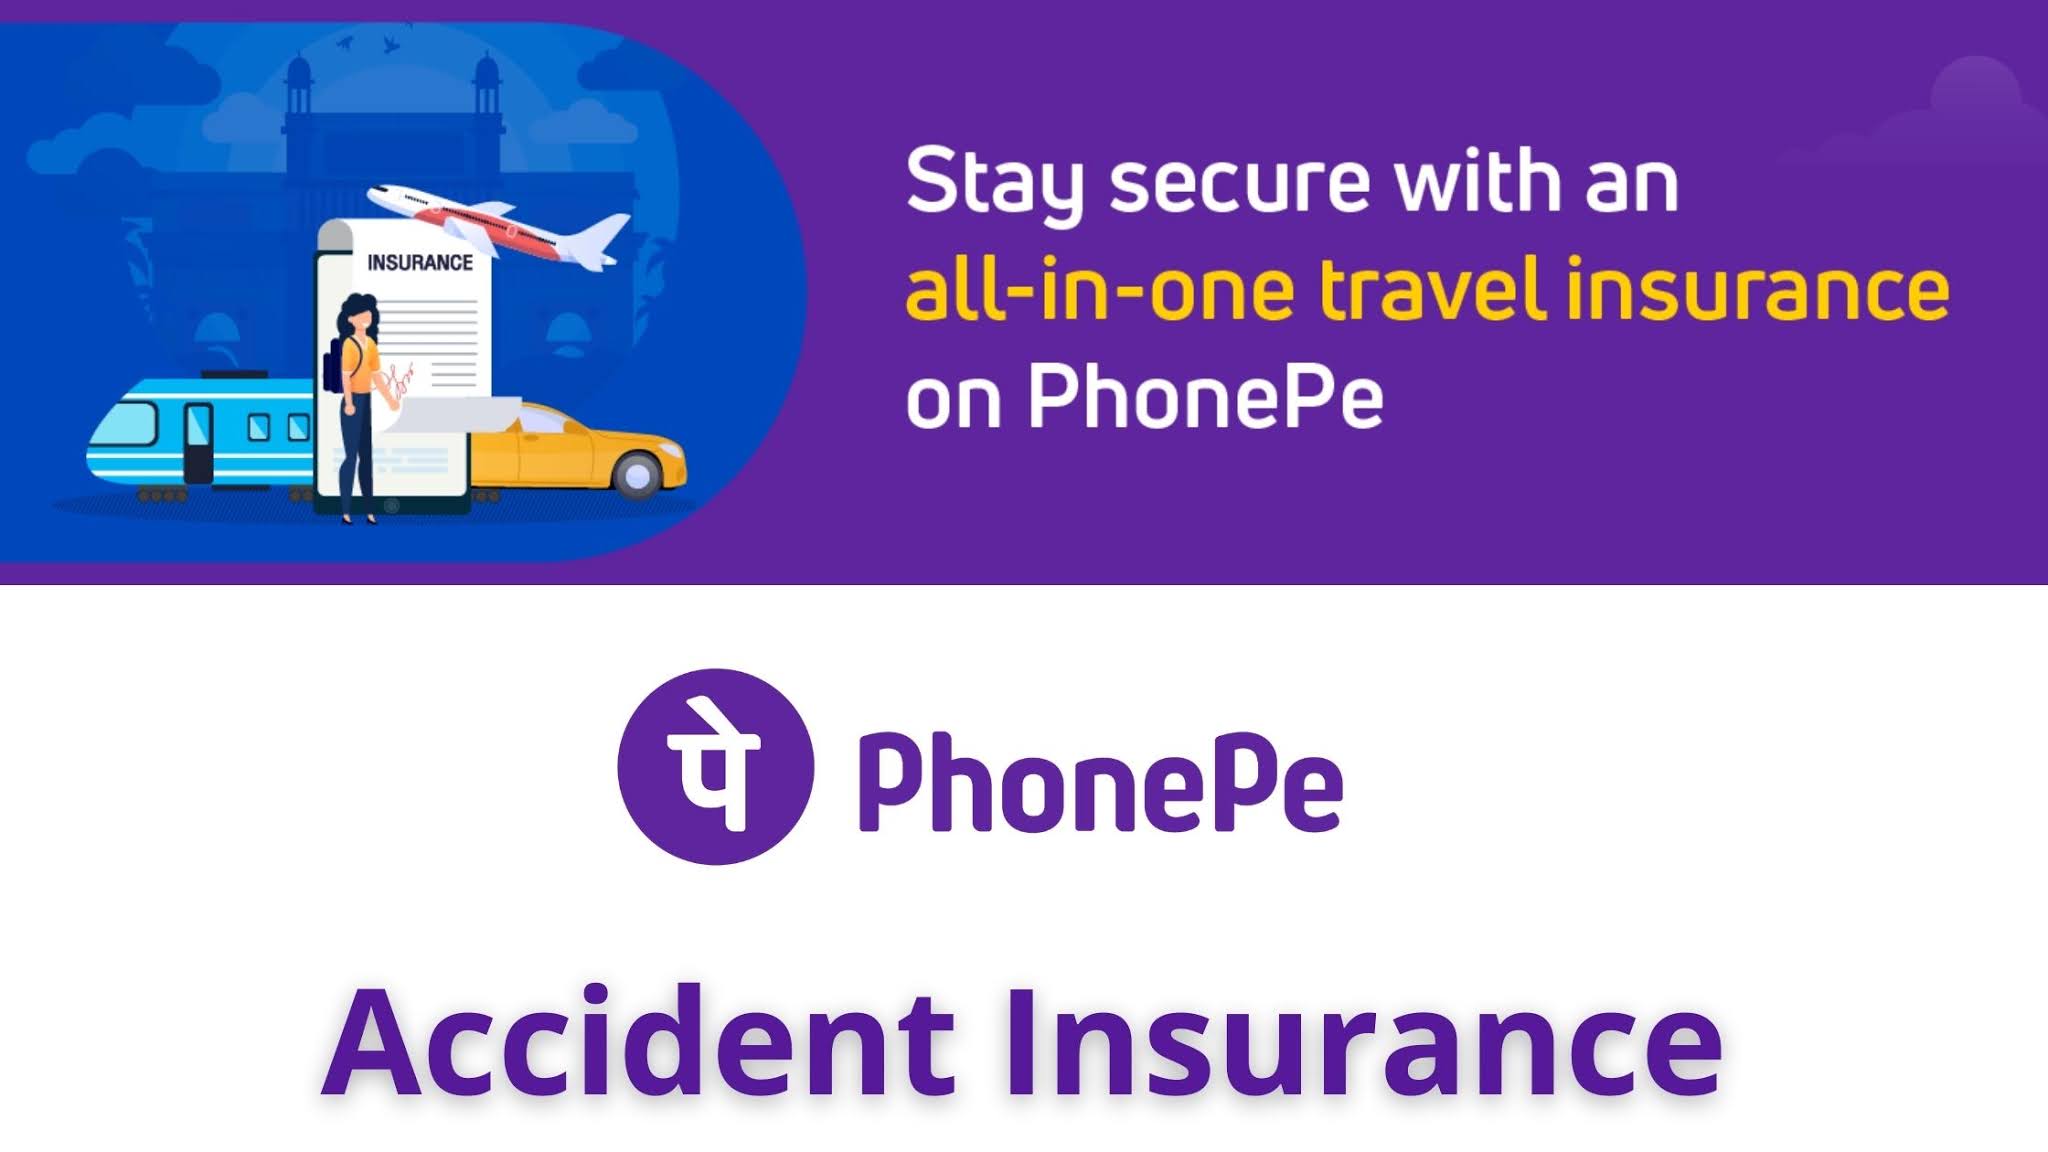 PhonePe Accident Insurance Starting at Rs 24/Yars*